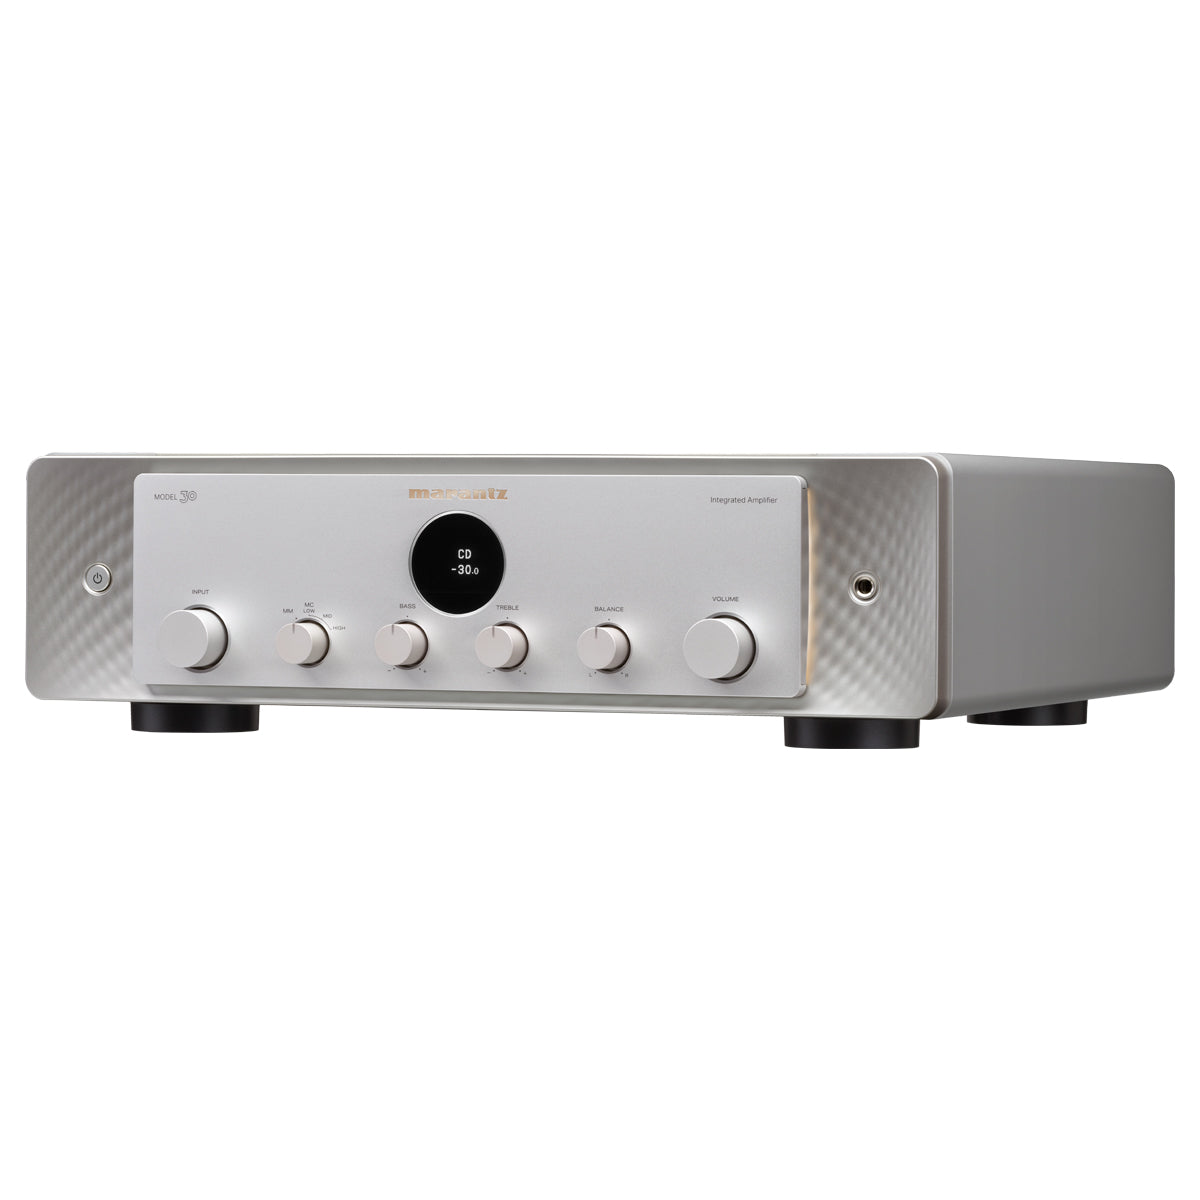 Marantz Model 30 Integrated Stereo Amplifier - Silver| Made in Japan - The Audio Experts